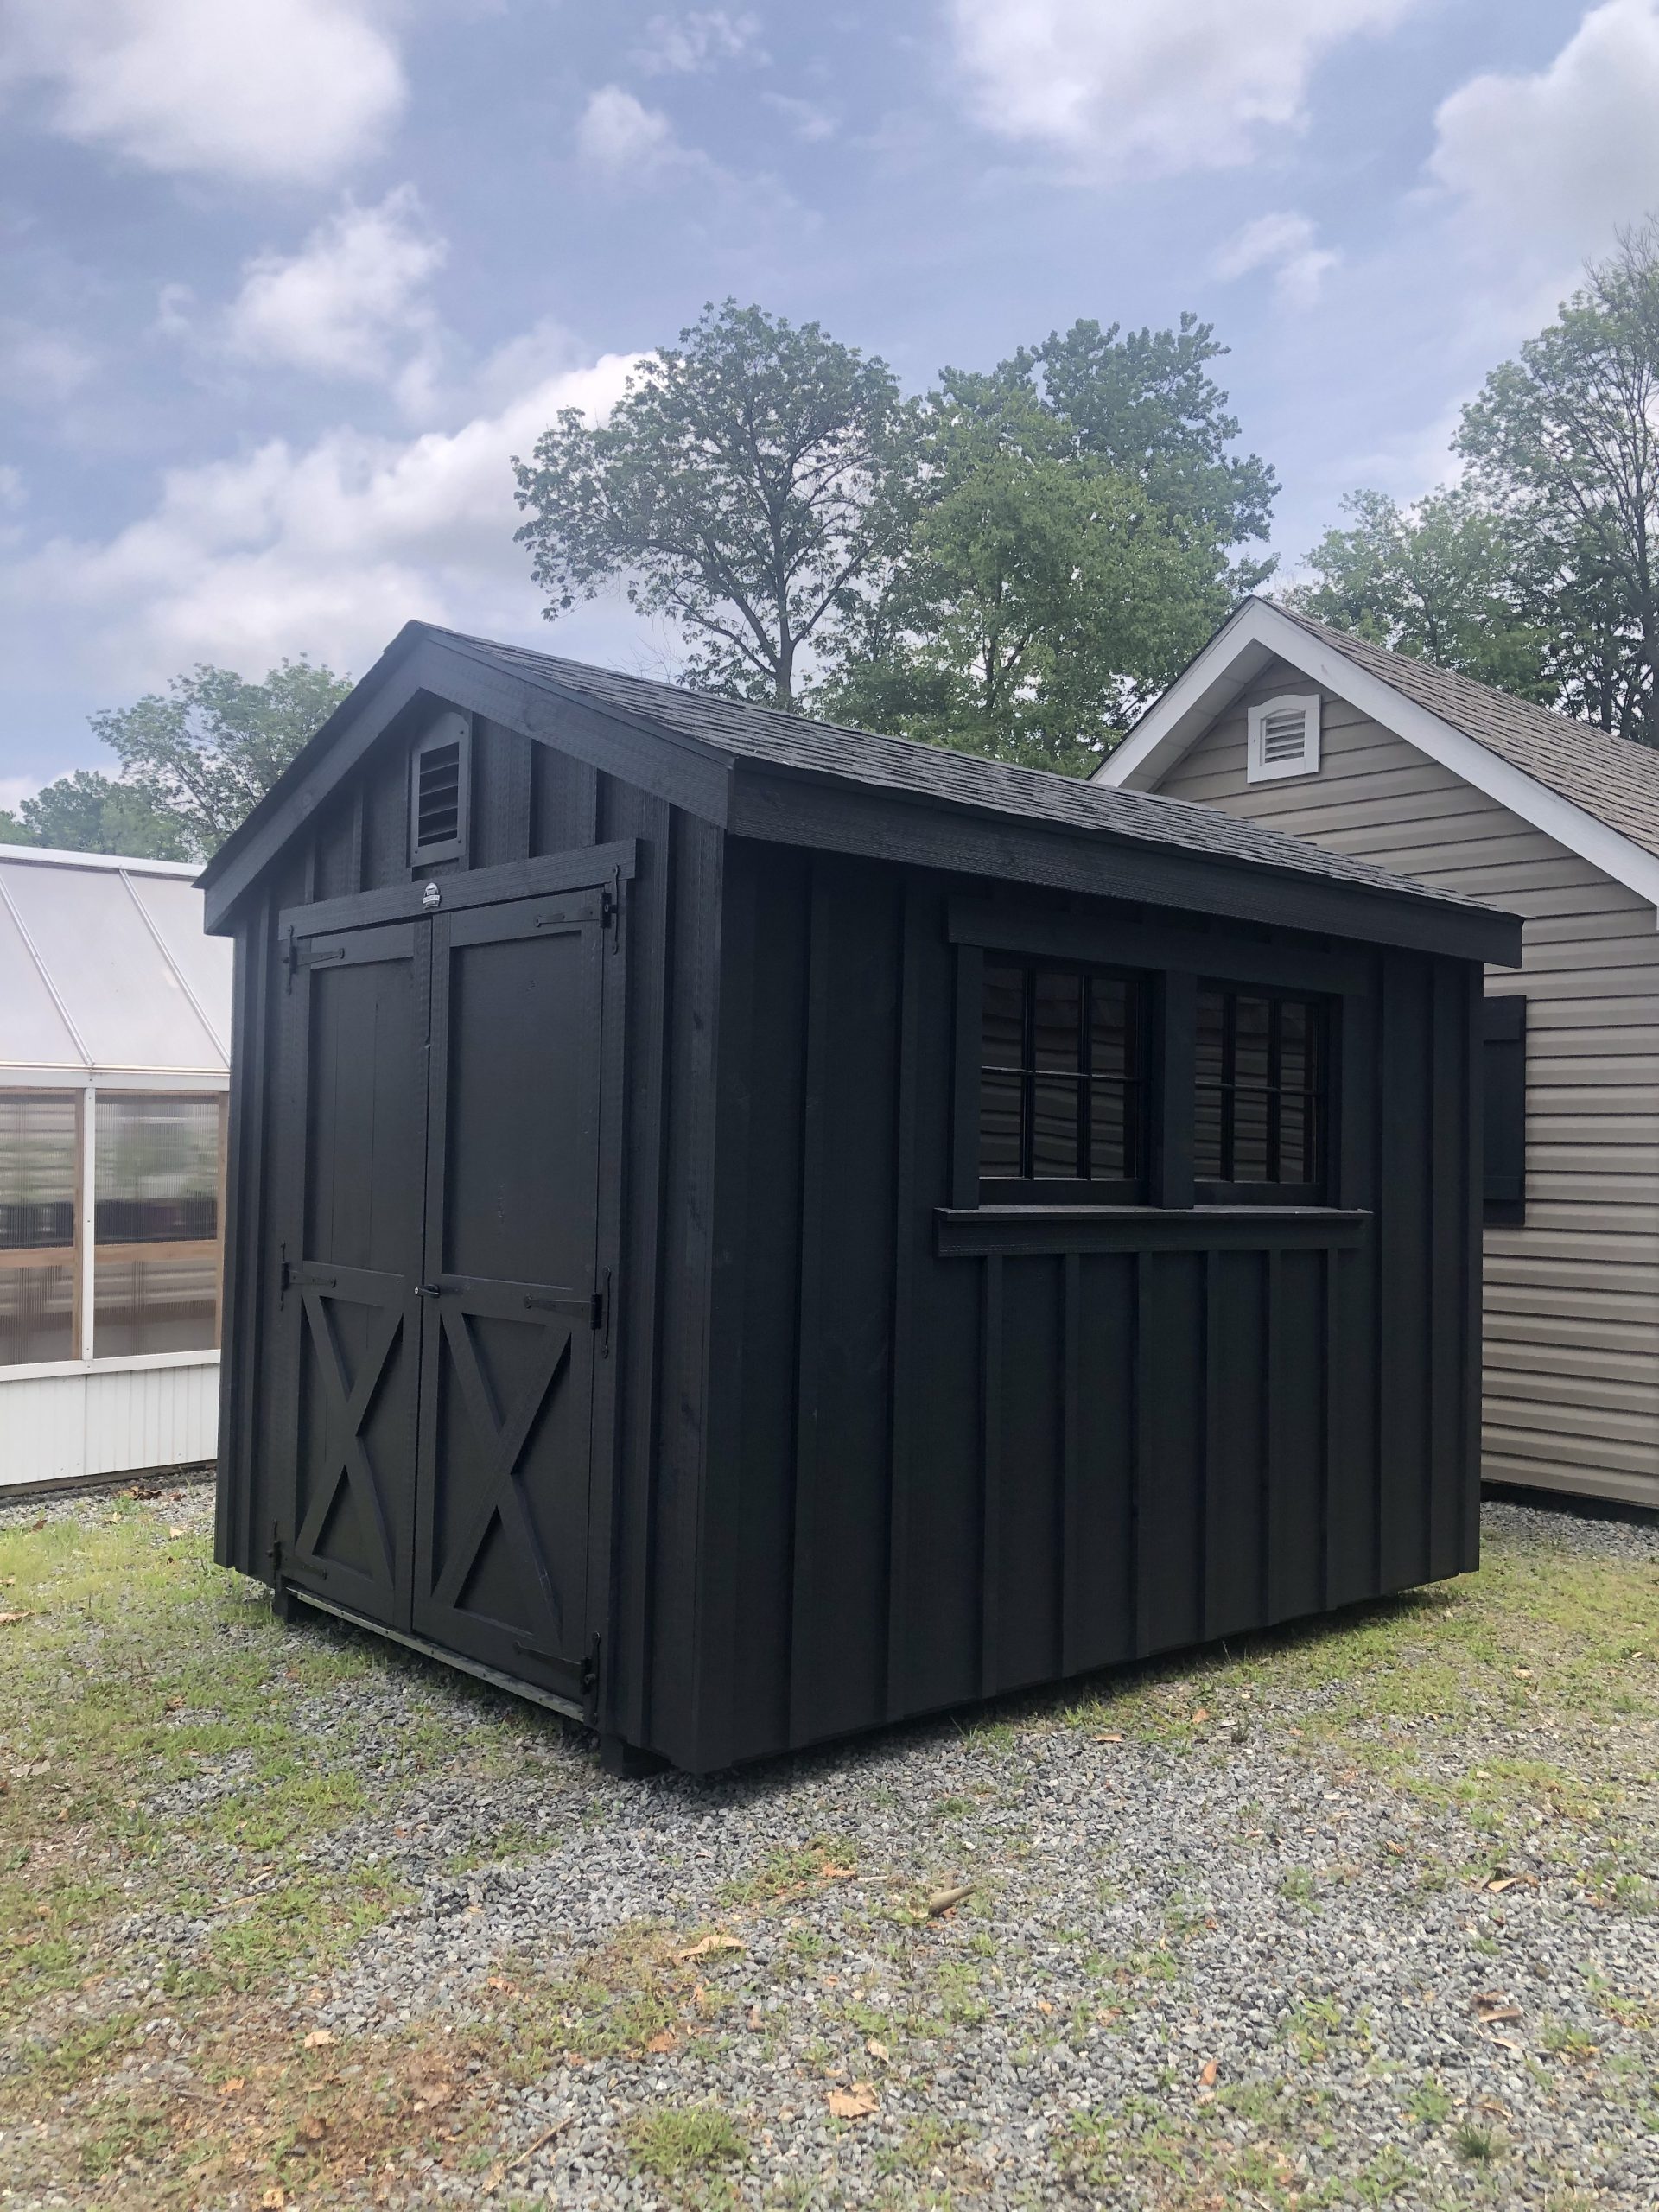 Winchester-Black shed w/ black shingle roof